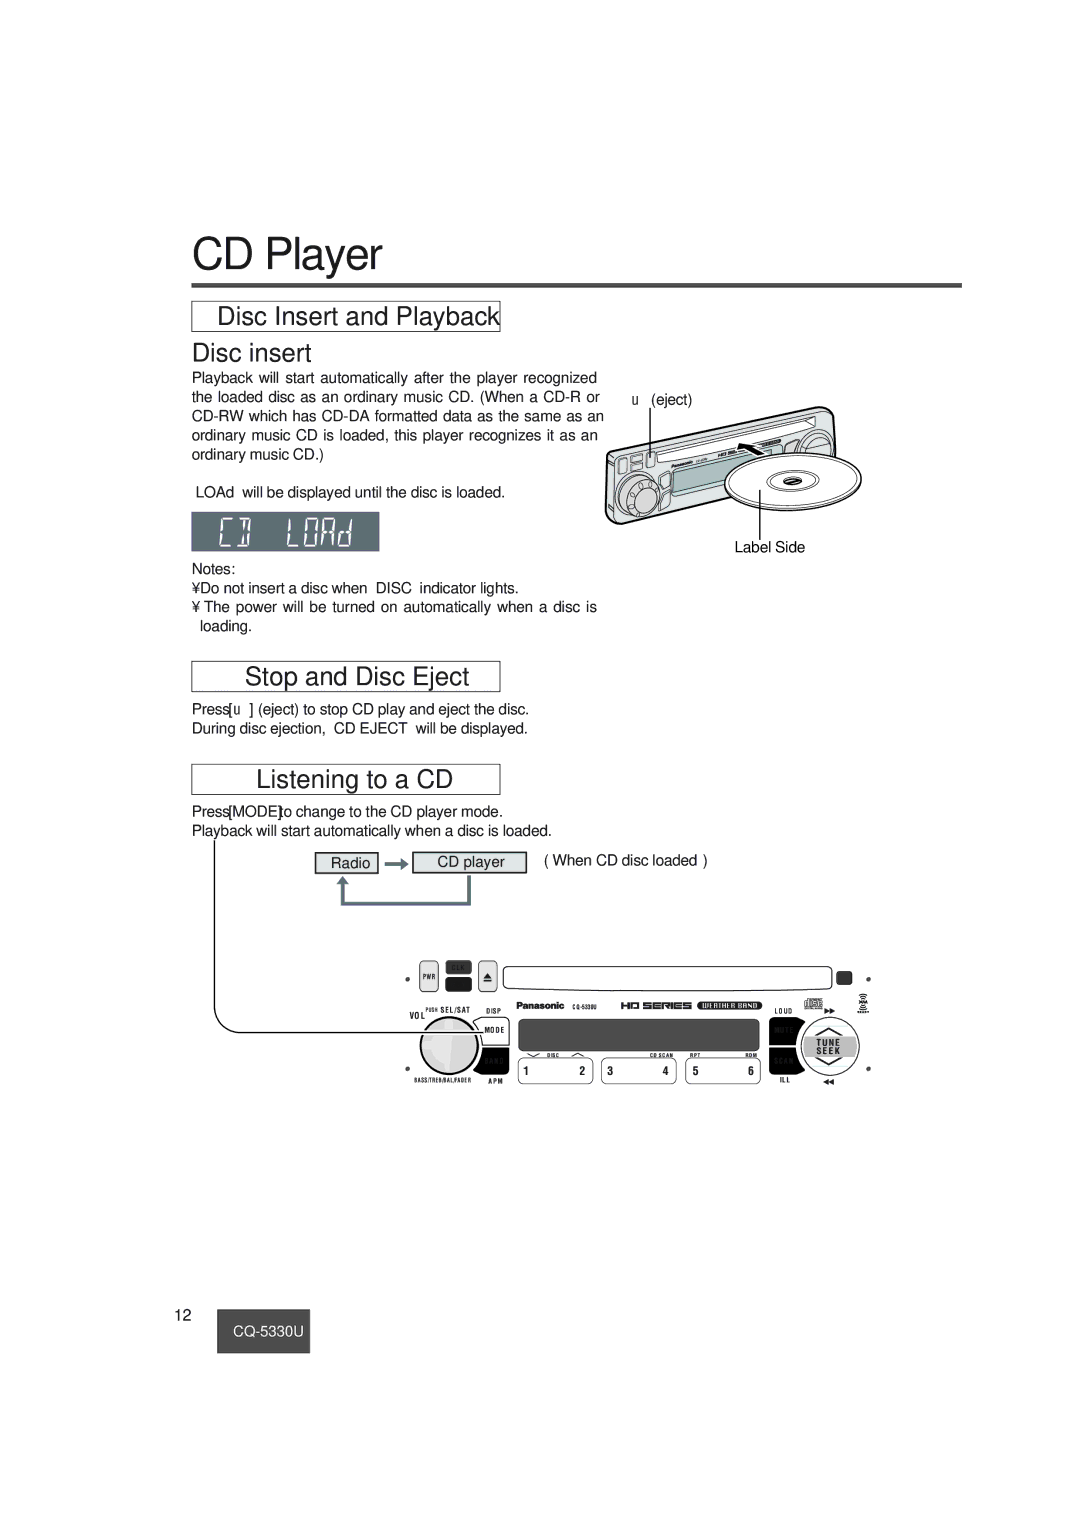 Panasonic CQ-5330U CD Player, Disc Insert and Playback Disc insert, Stop and Disc Eject, Listening to a CD 